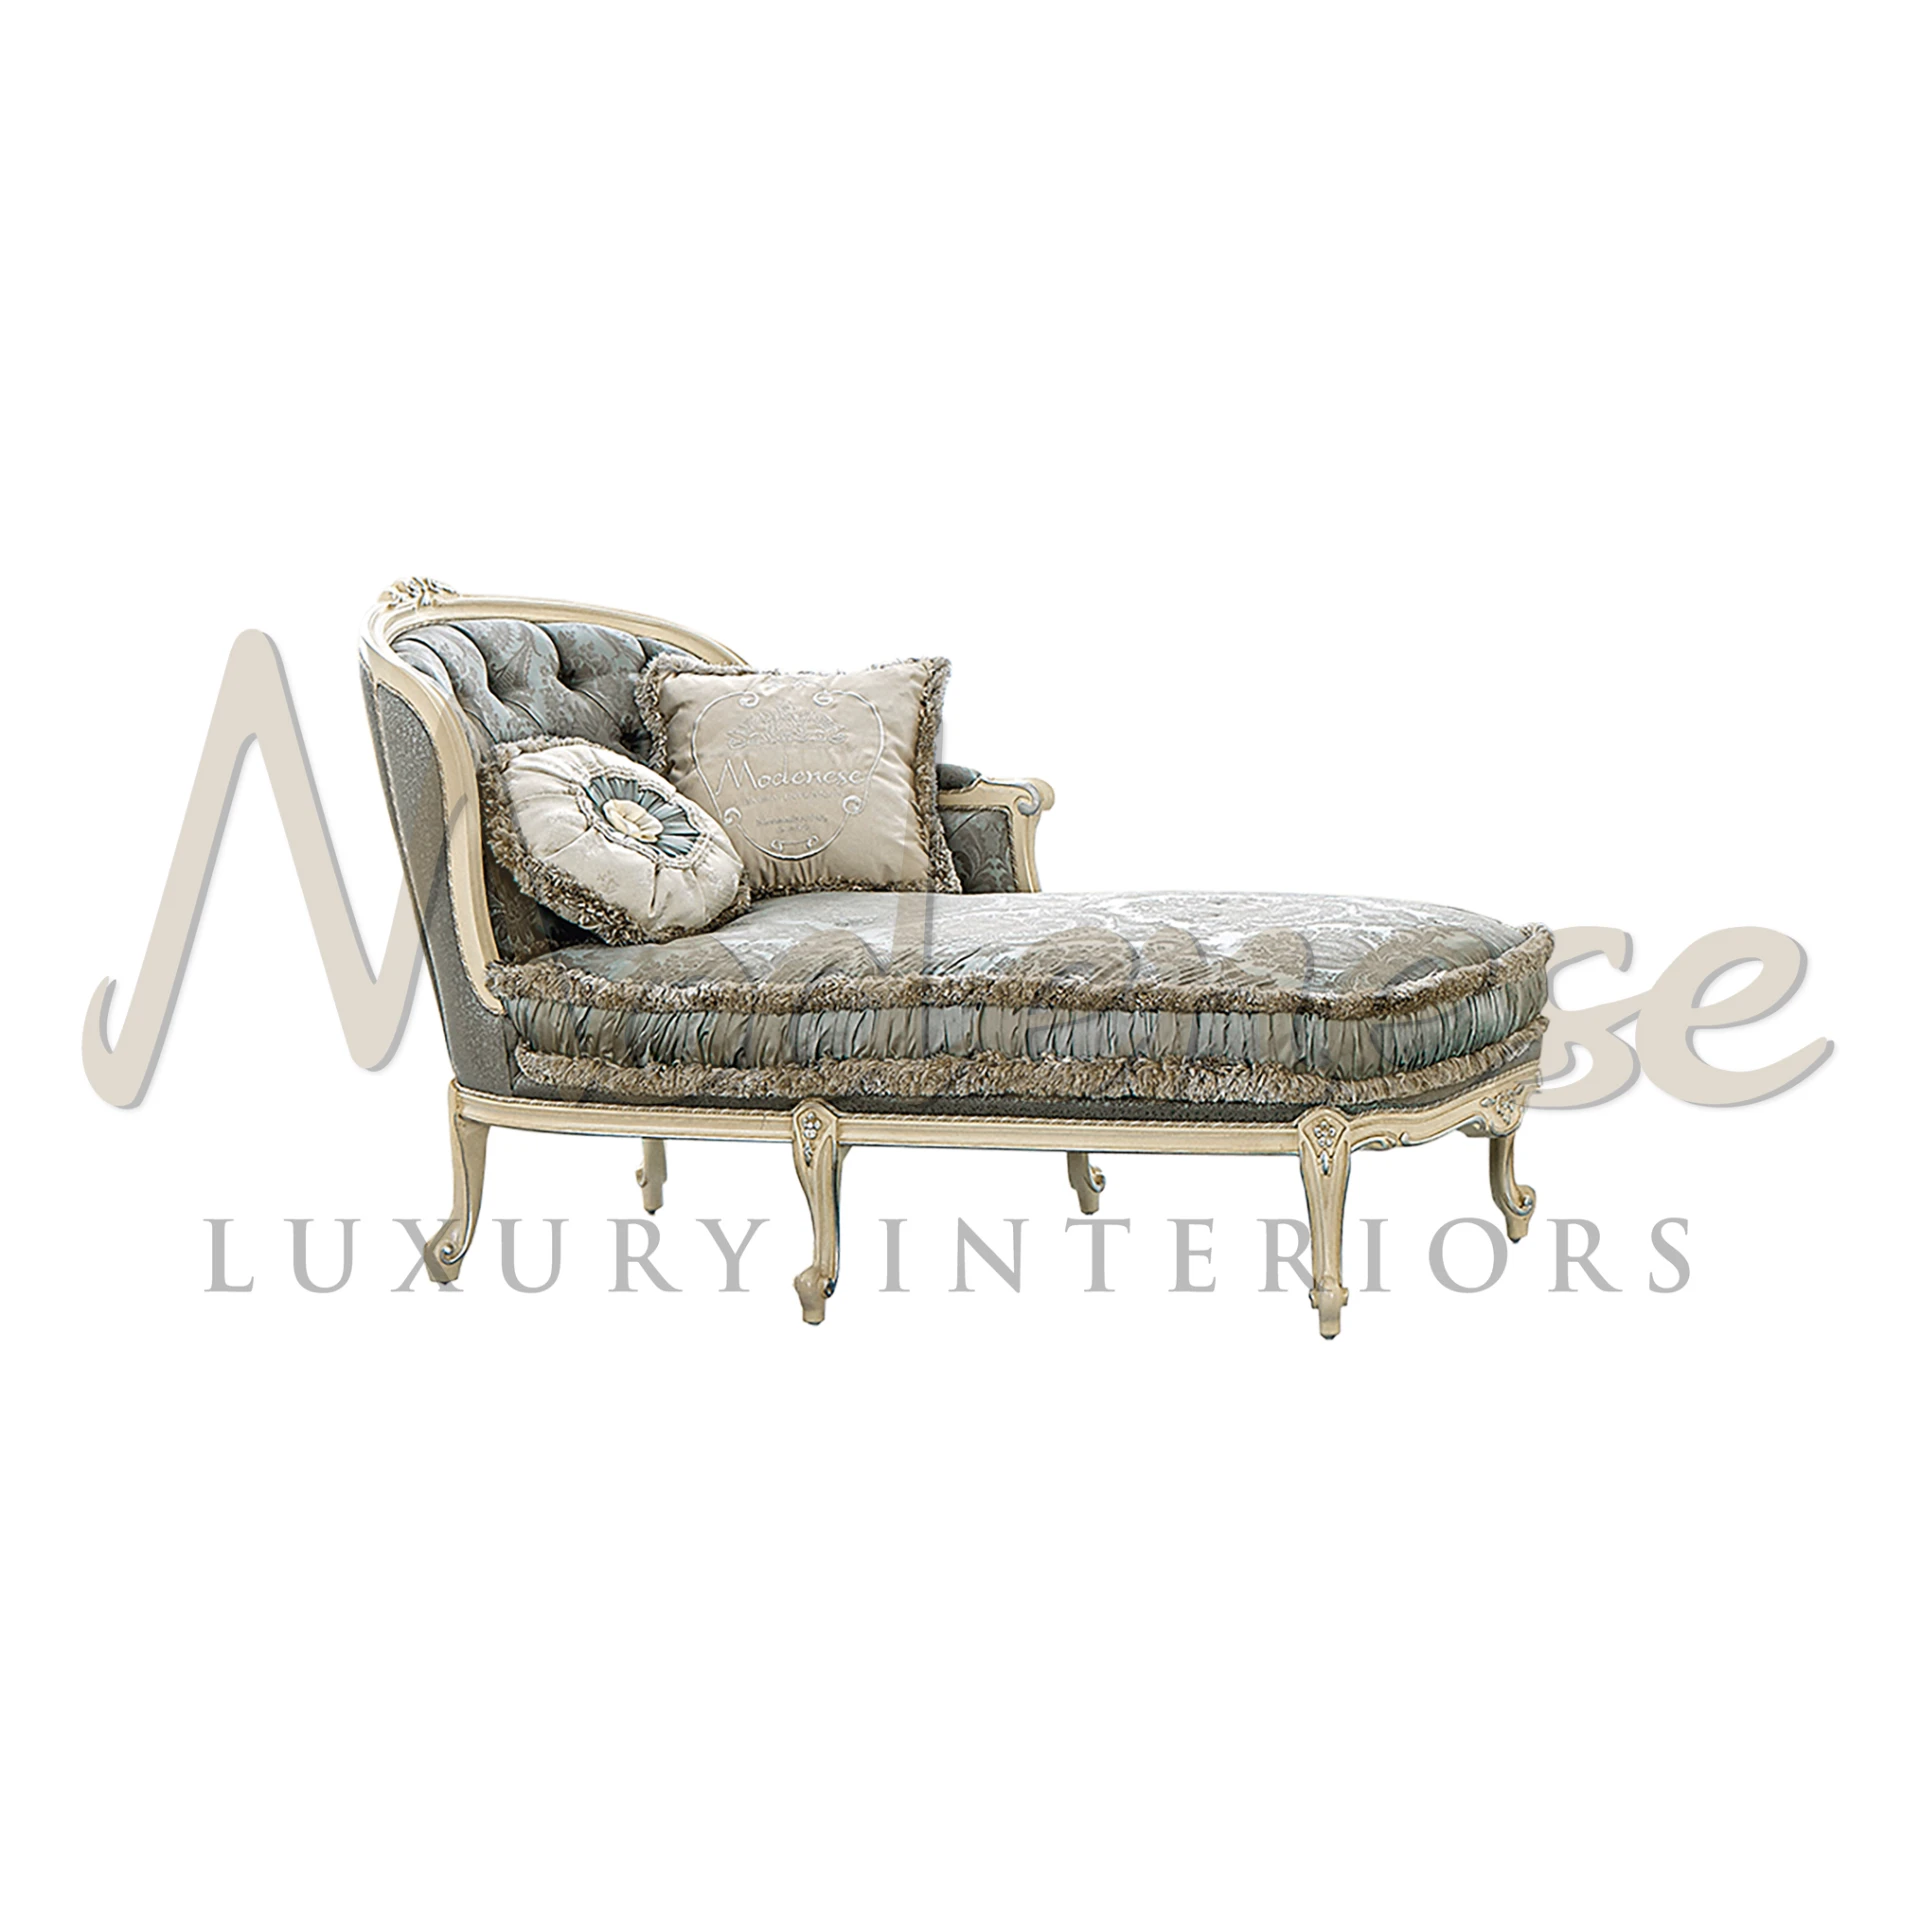 French-style chaise lounge with green fabric and ornate white woodwork.                                                                                     